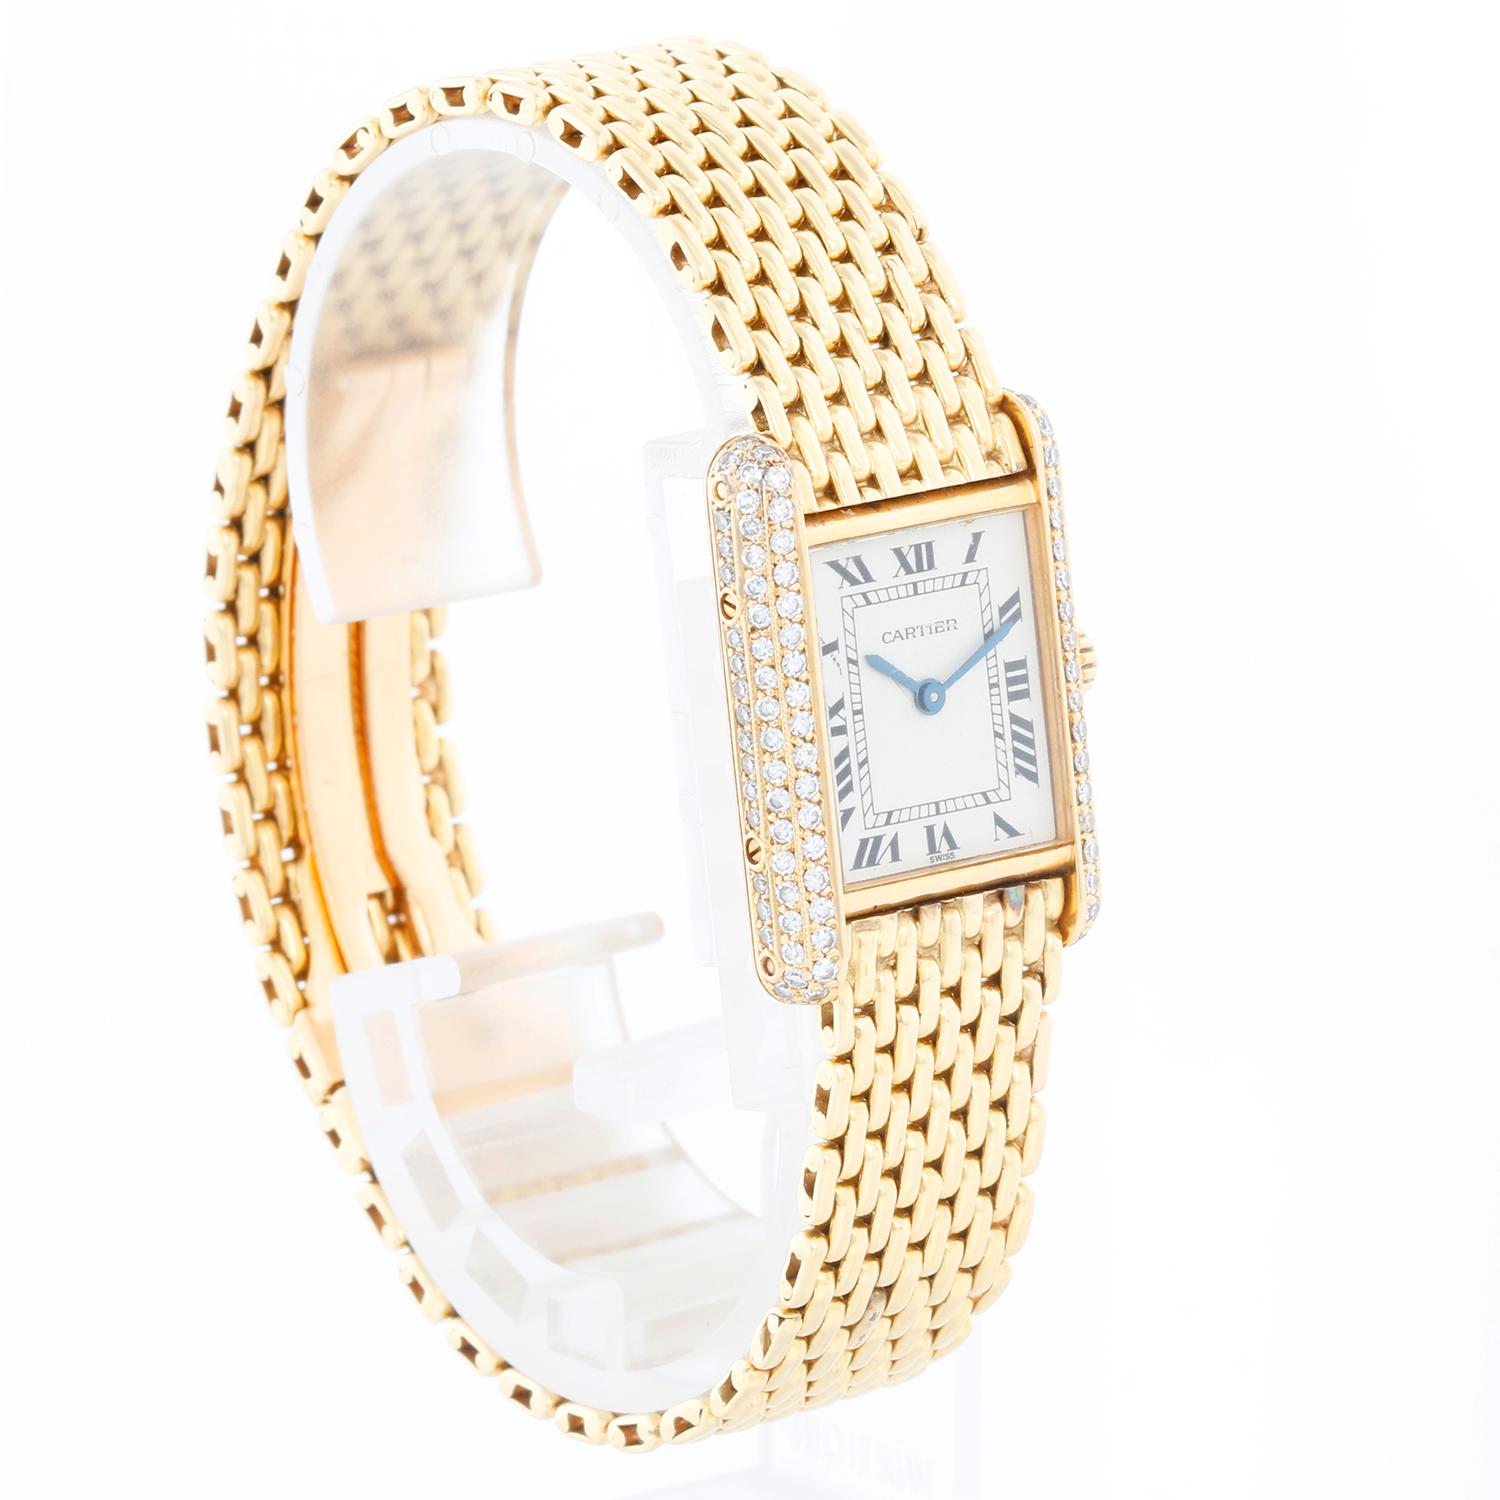 Cartier 18K Yellow Gold Tank Ladies Watch In Excellent Condition For Sale In Dallas, TX